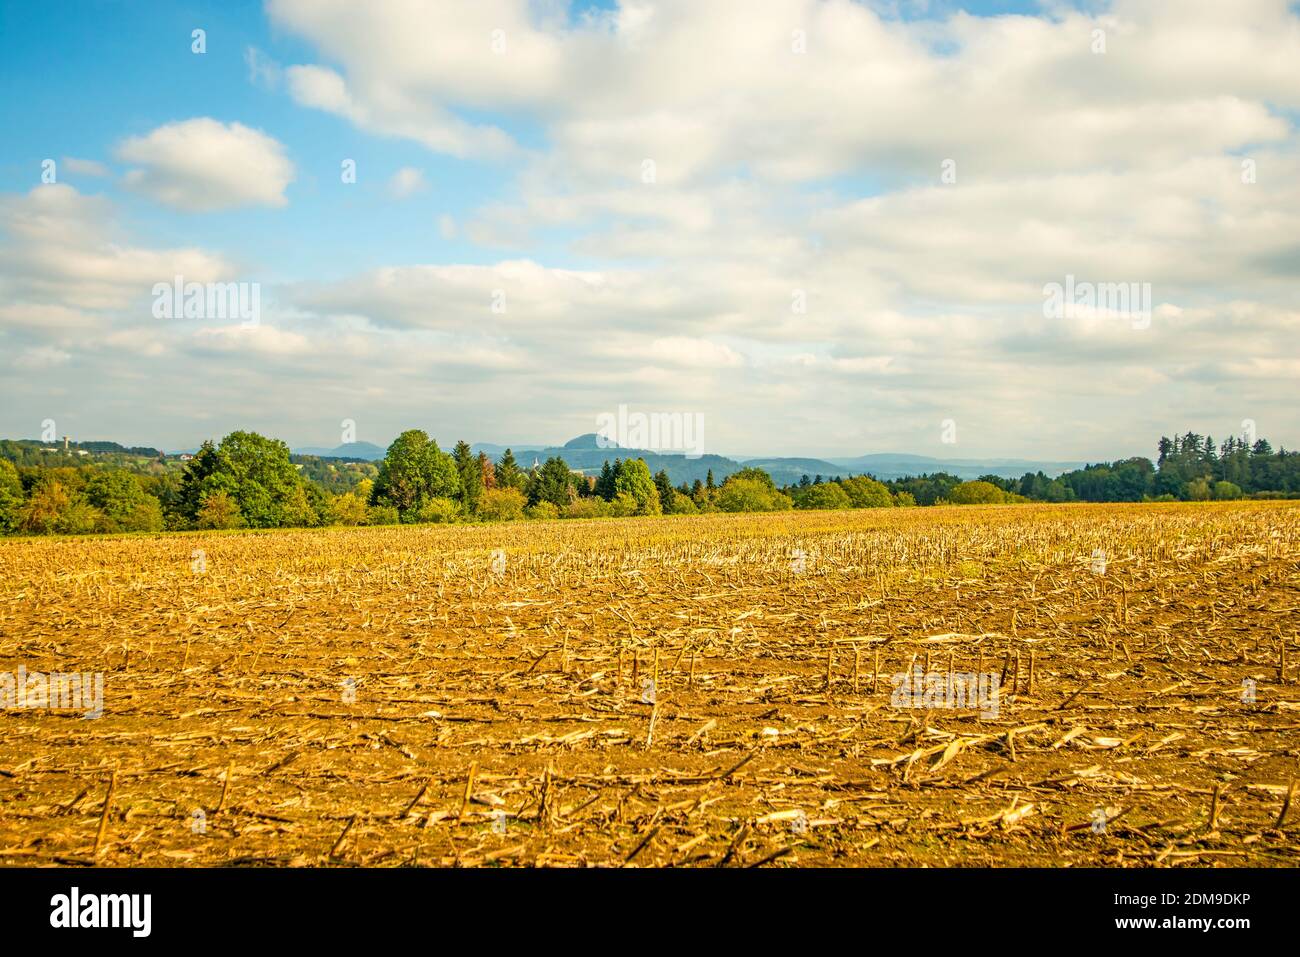 Harvested Corn Field With Mountain In The Background Stock Photo